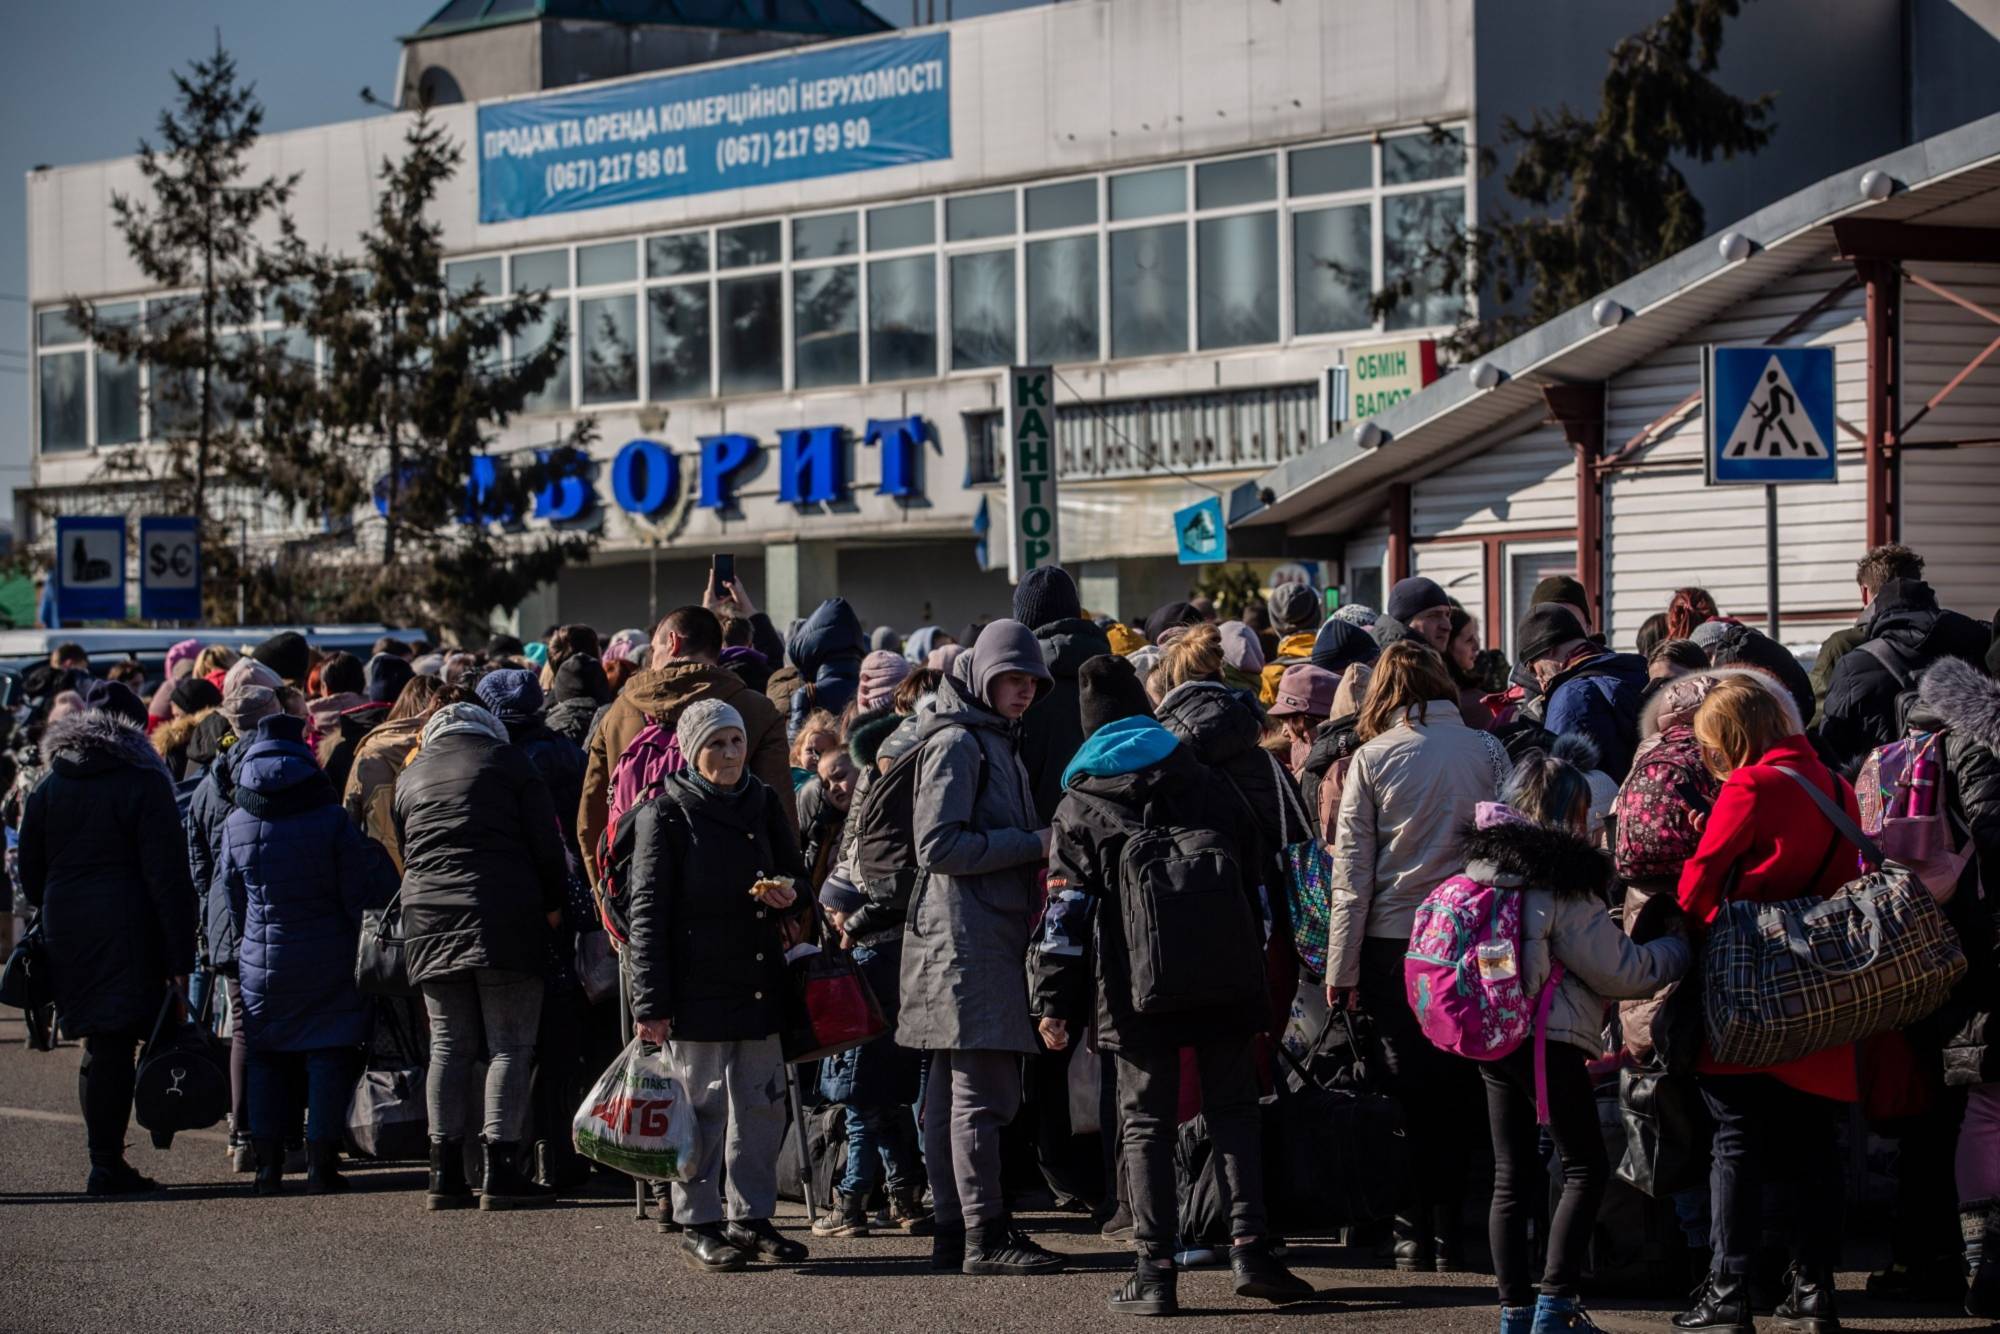 Ukrainian refugees queue to cross over into Poland via the Medyka border crossing in Shehyni, Ukraine, on March 18. | BLOOMBERG